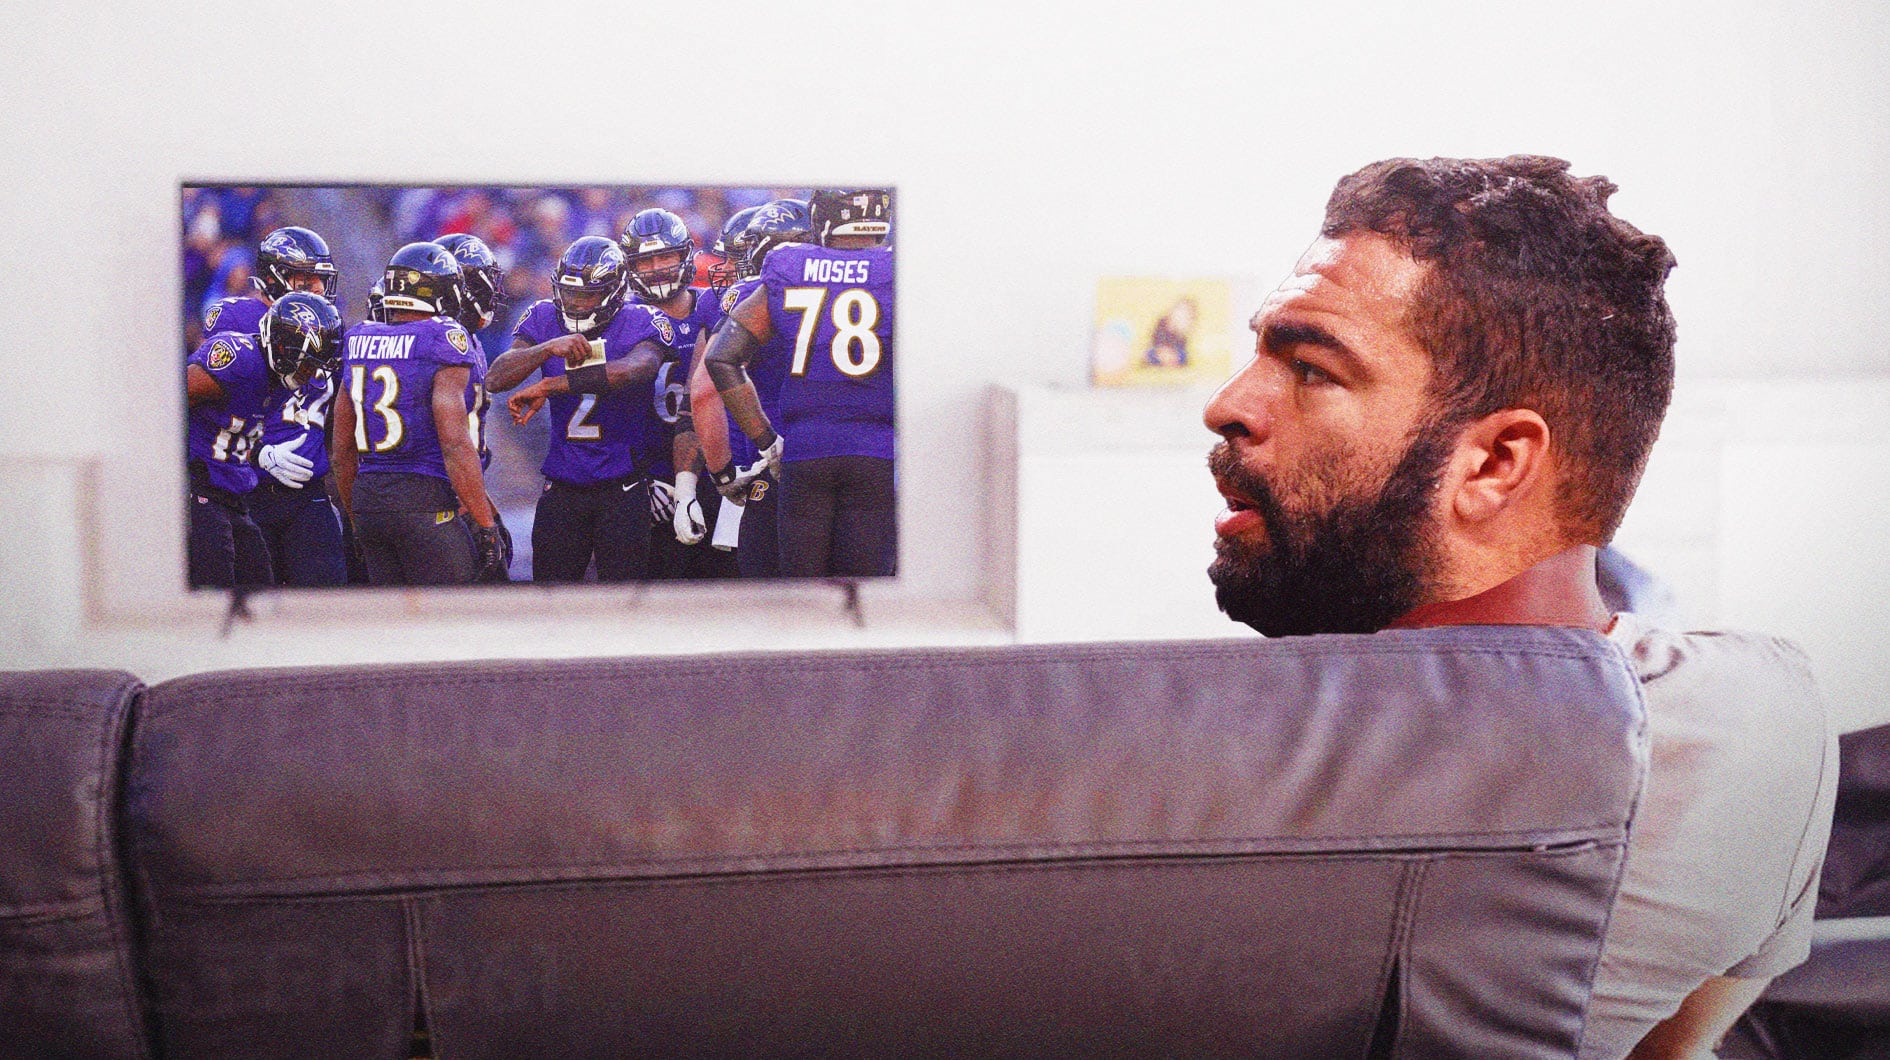 Kyle Van Noy sitting on the couch watching a TV. Have Ravens players on the TV